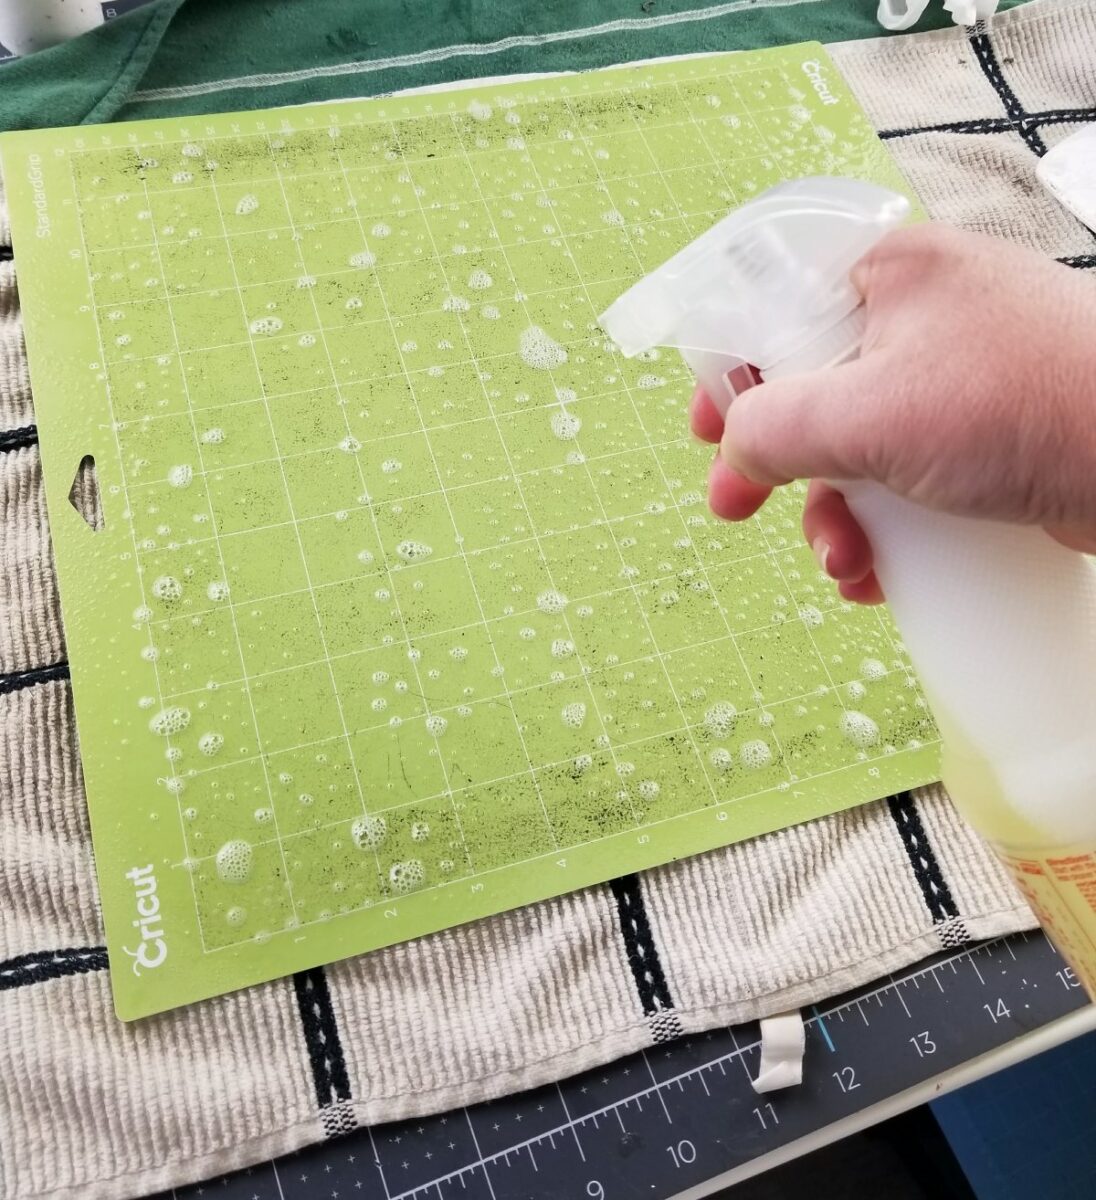 cricut mat cleaning awesome spray